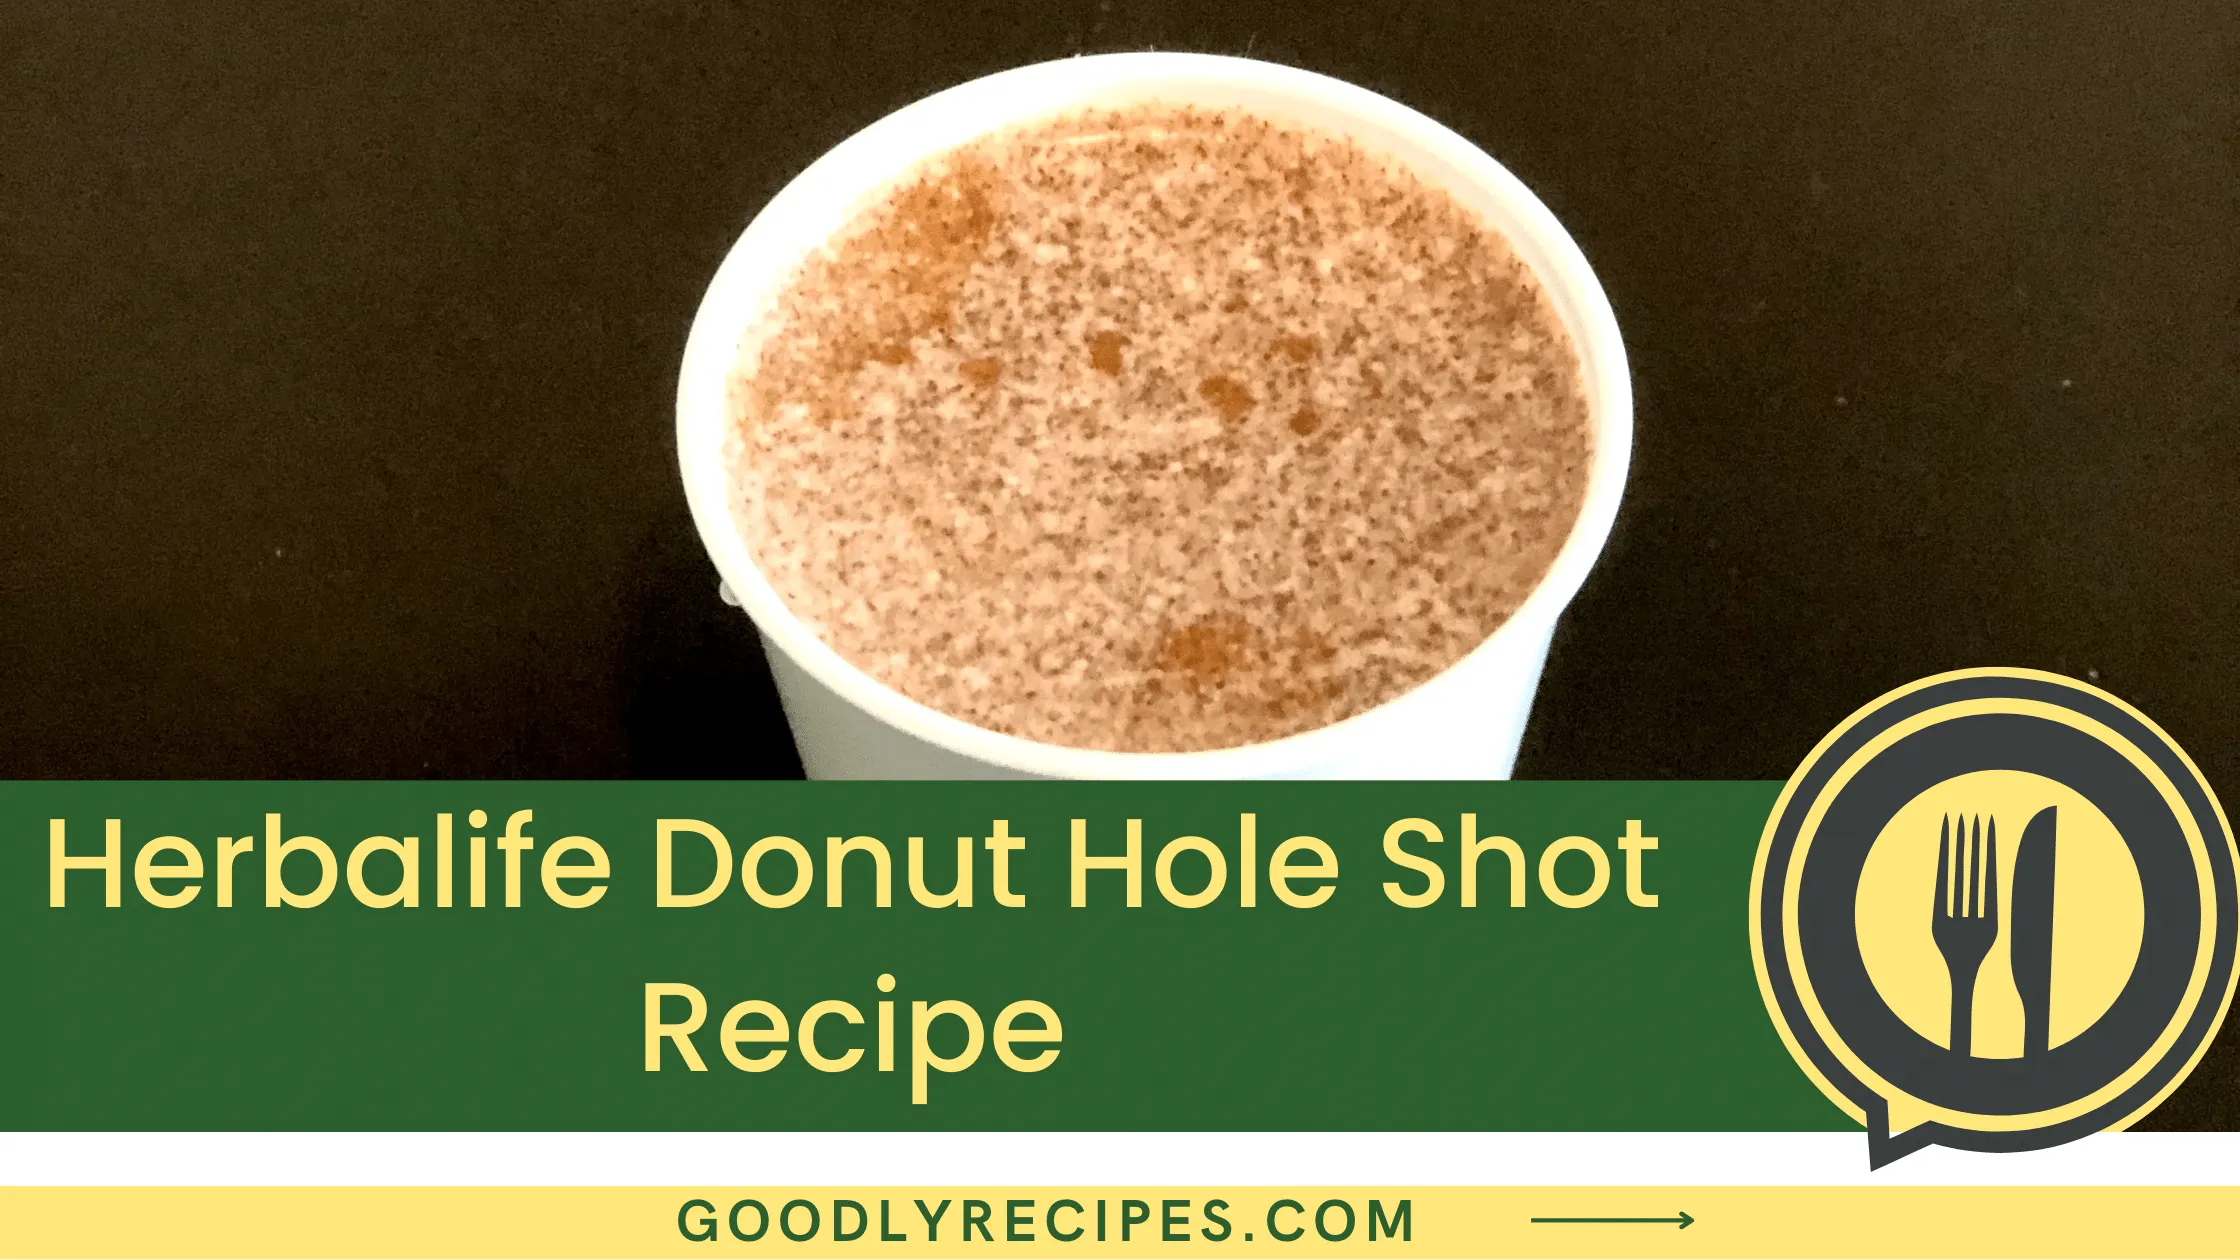 Herbalife Donut Hole Shot Recipe - For Food Lovers